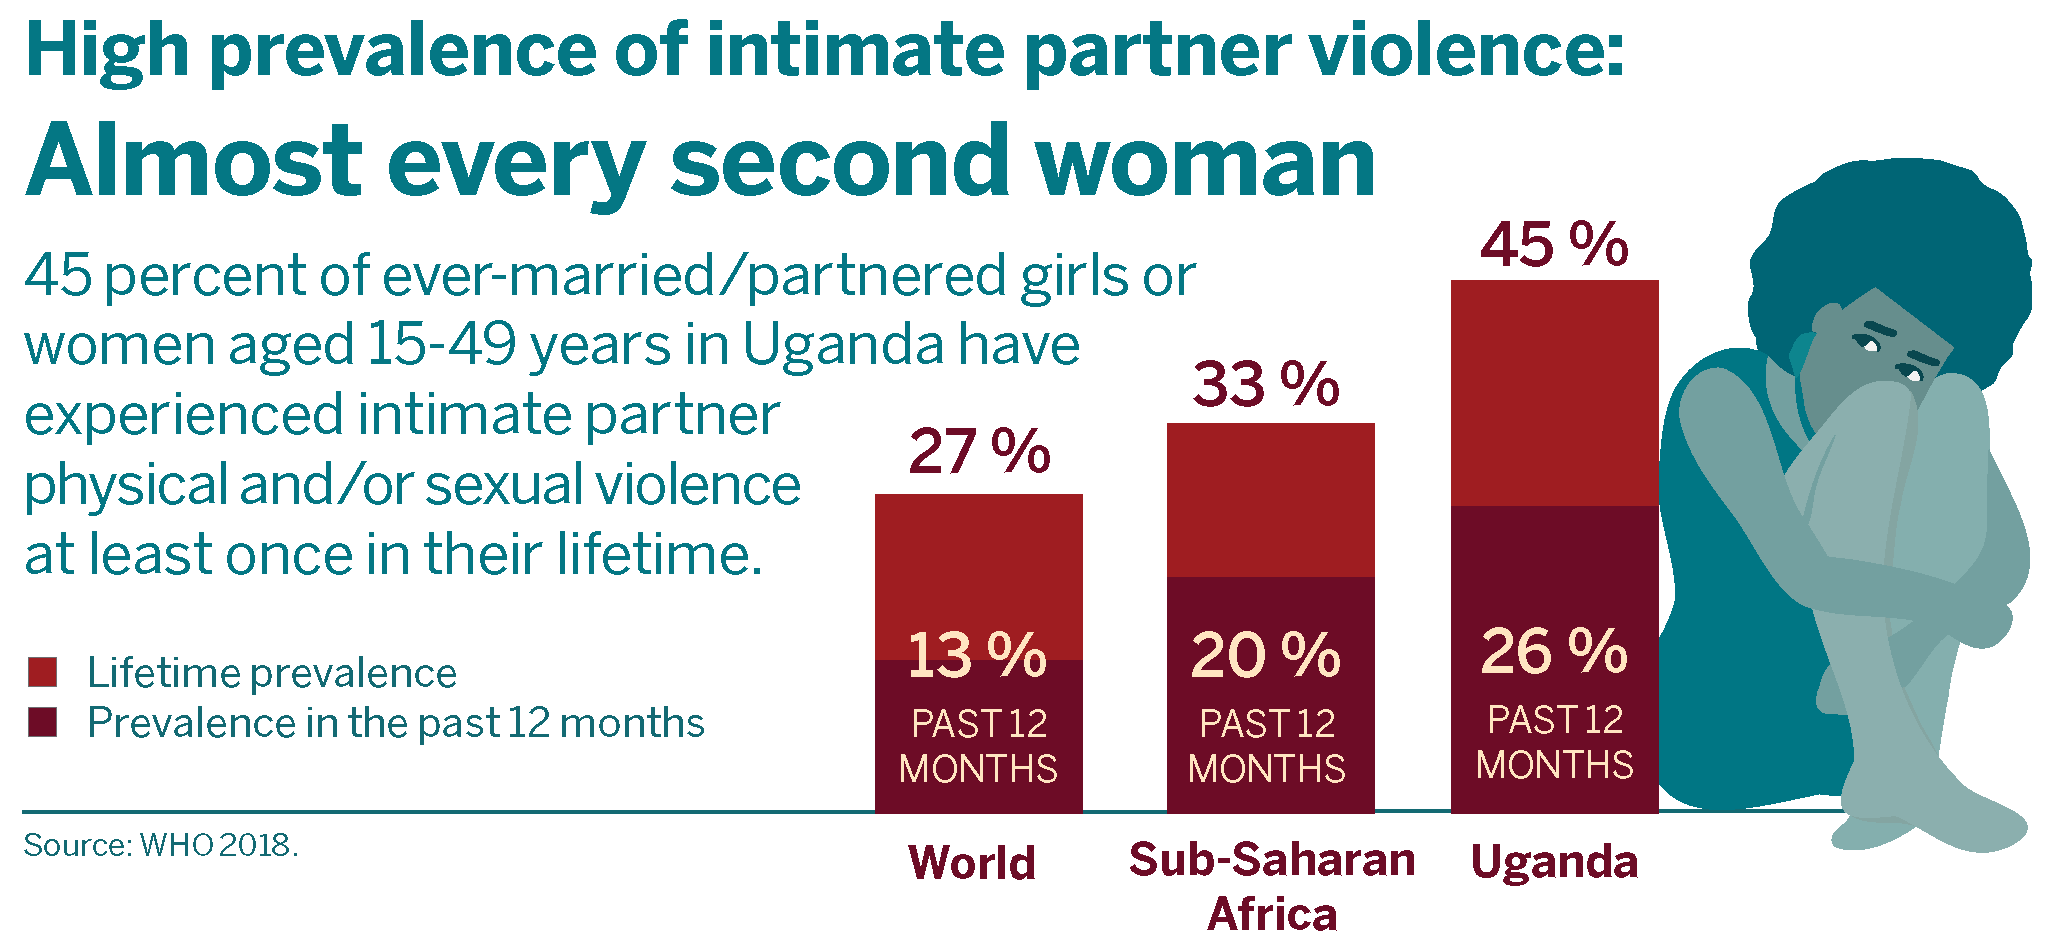 High prevalence of intimate partner violence: Almost every second woman